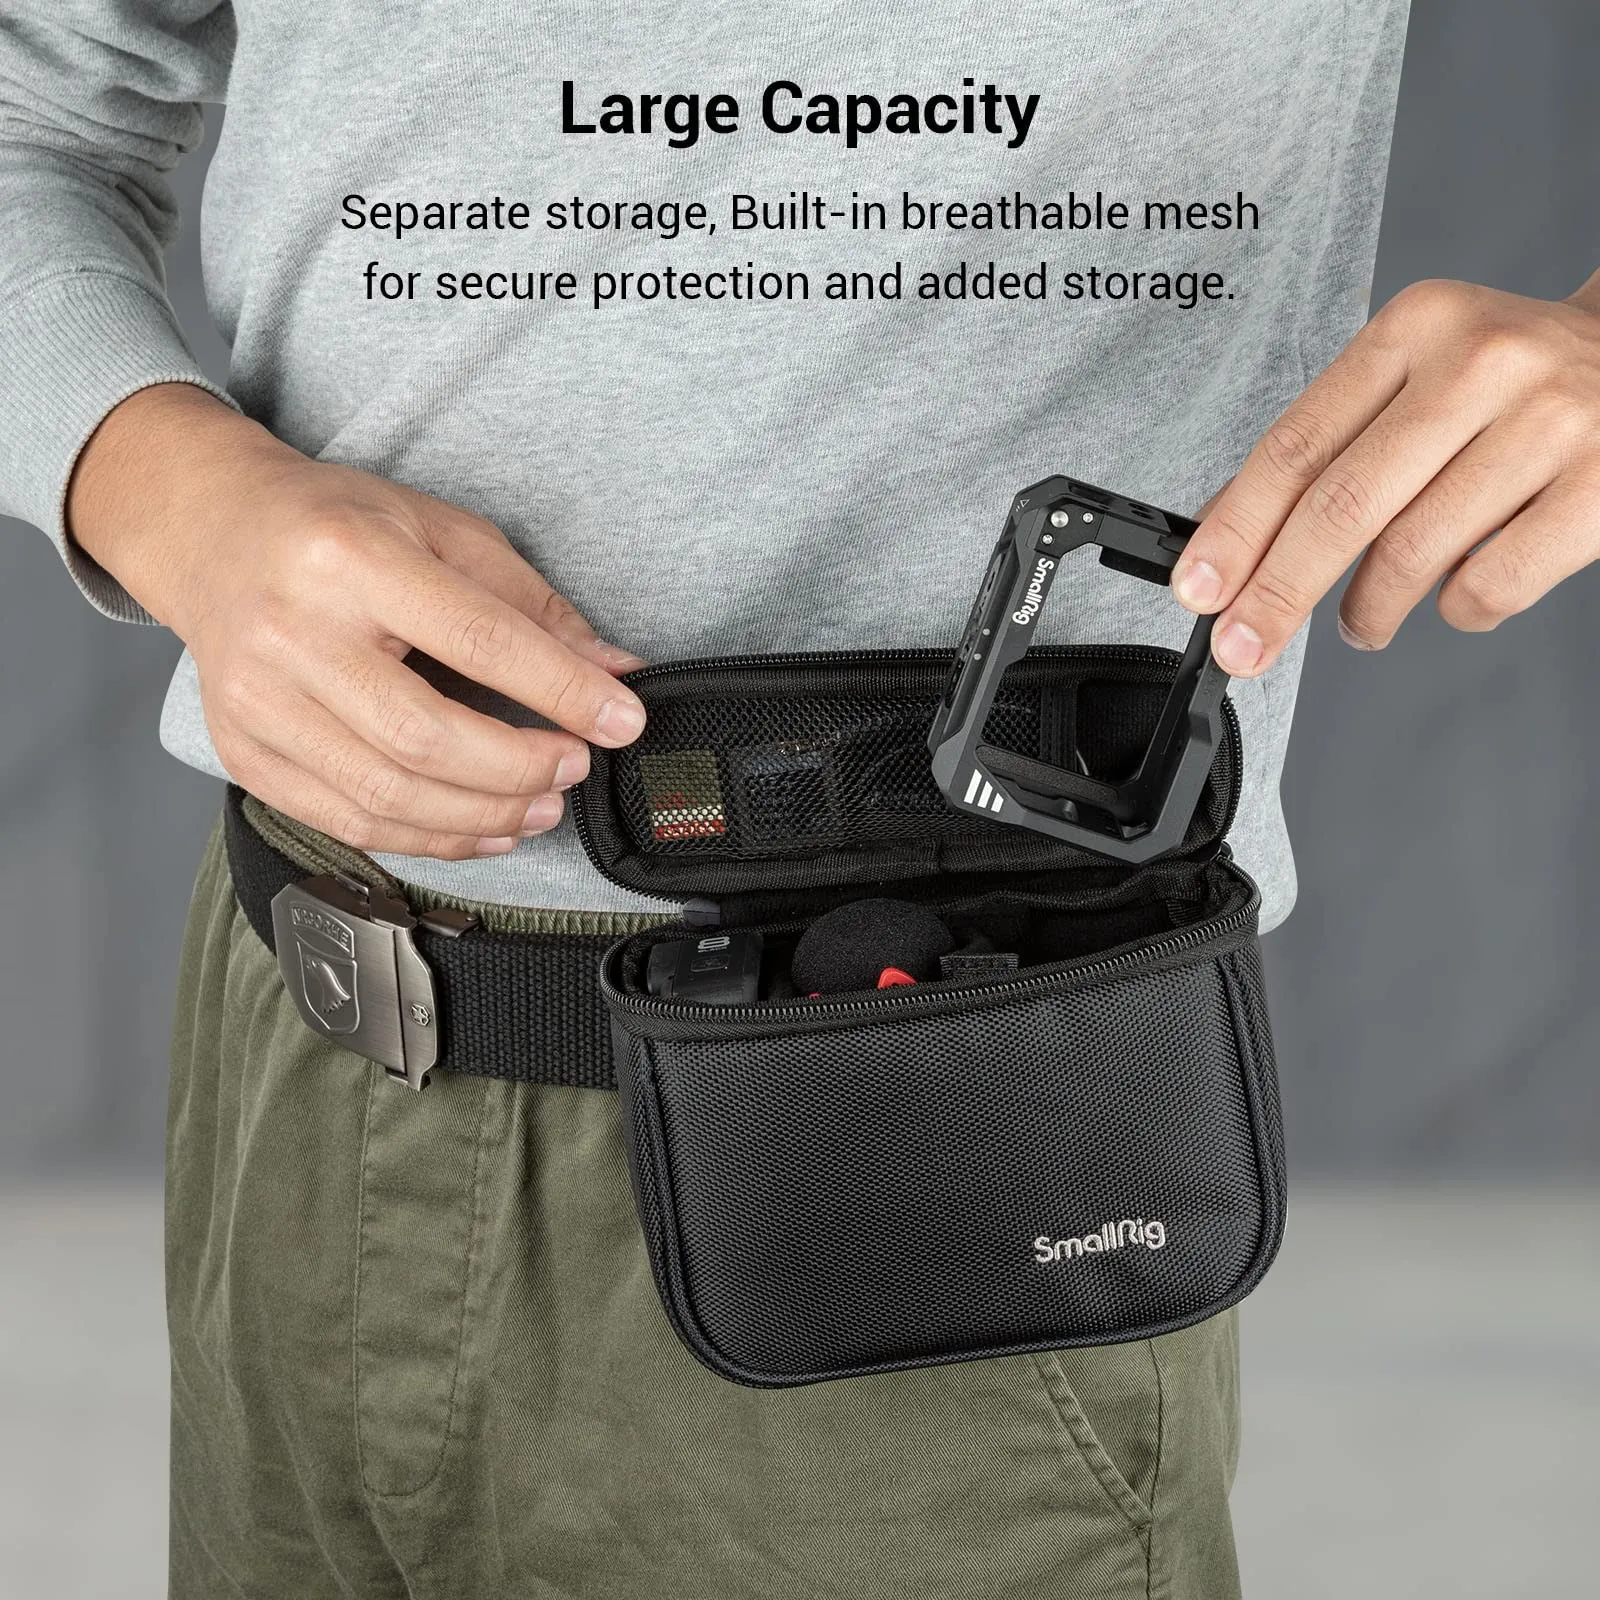 https://ae01.alicdn.com/kf/S65cb68bfa0244dce8ef553828abaa5eau/SmallRig-Storage-Bag-Quick-and-Easy-Storage-of-Scattered-Accessories-160-x-120-x-65mm-of.jpg